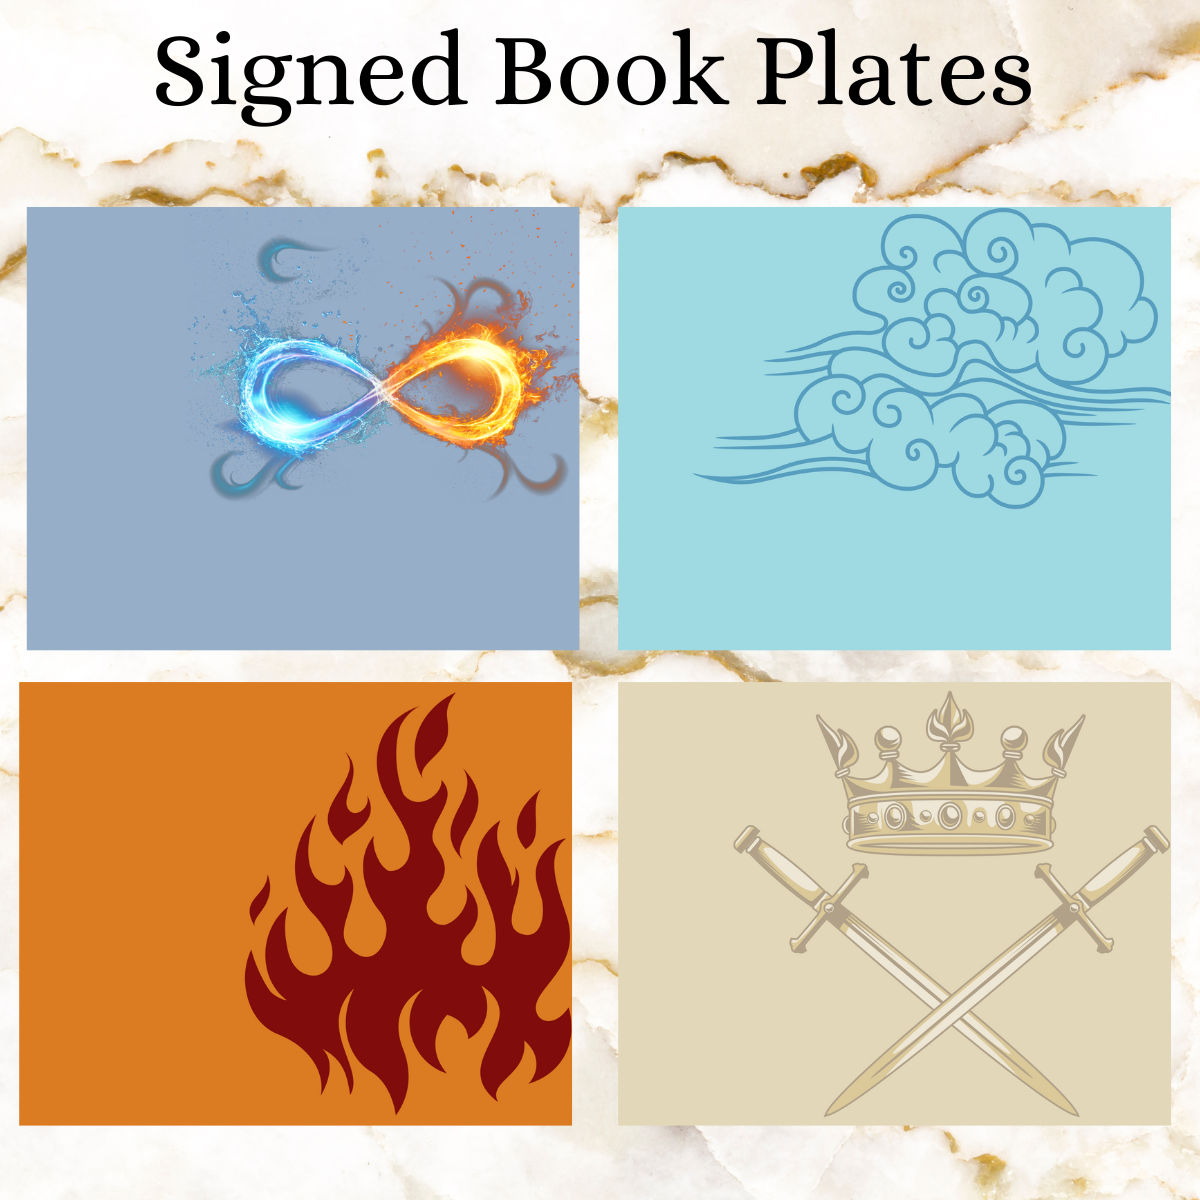 Book Plates Signed